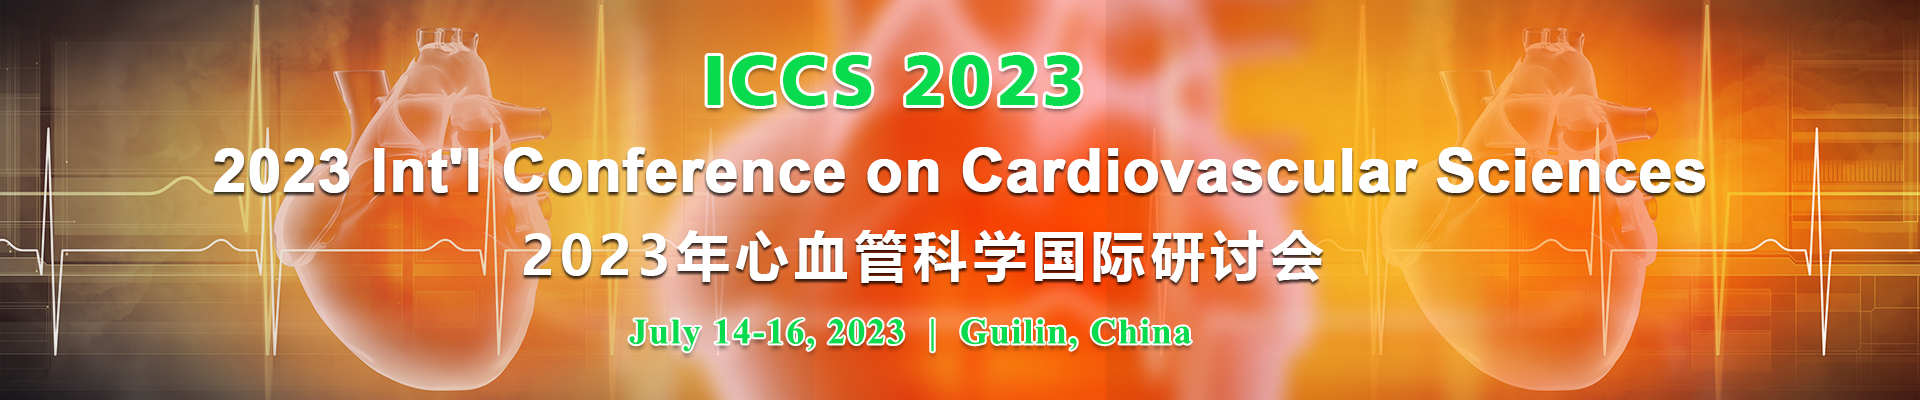 2023 Int'l Conference on Cardiovascular Sciences (ICCS 2023), Guilin, Guangxi, China